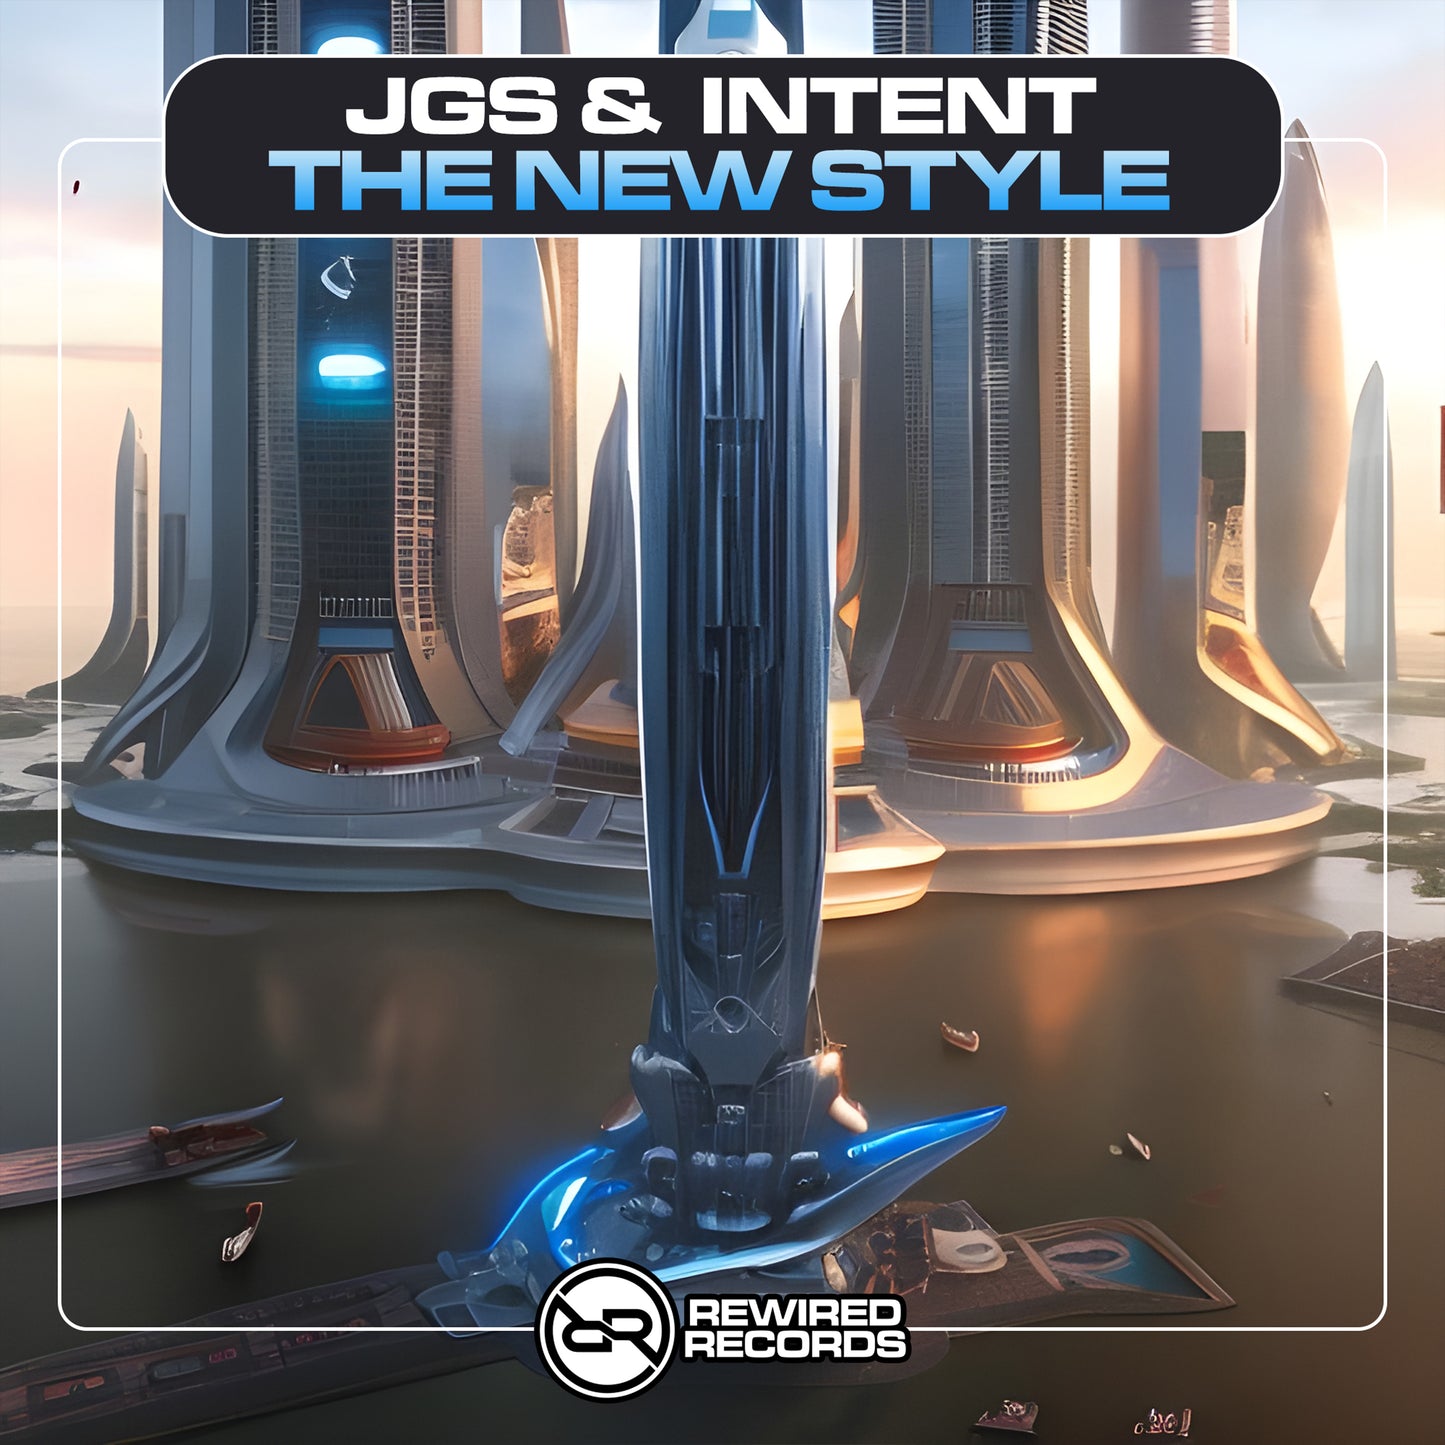 JGS & INTENT - The New Style